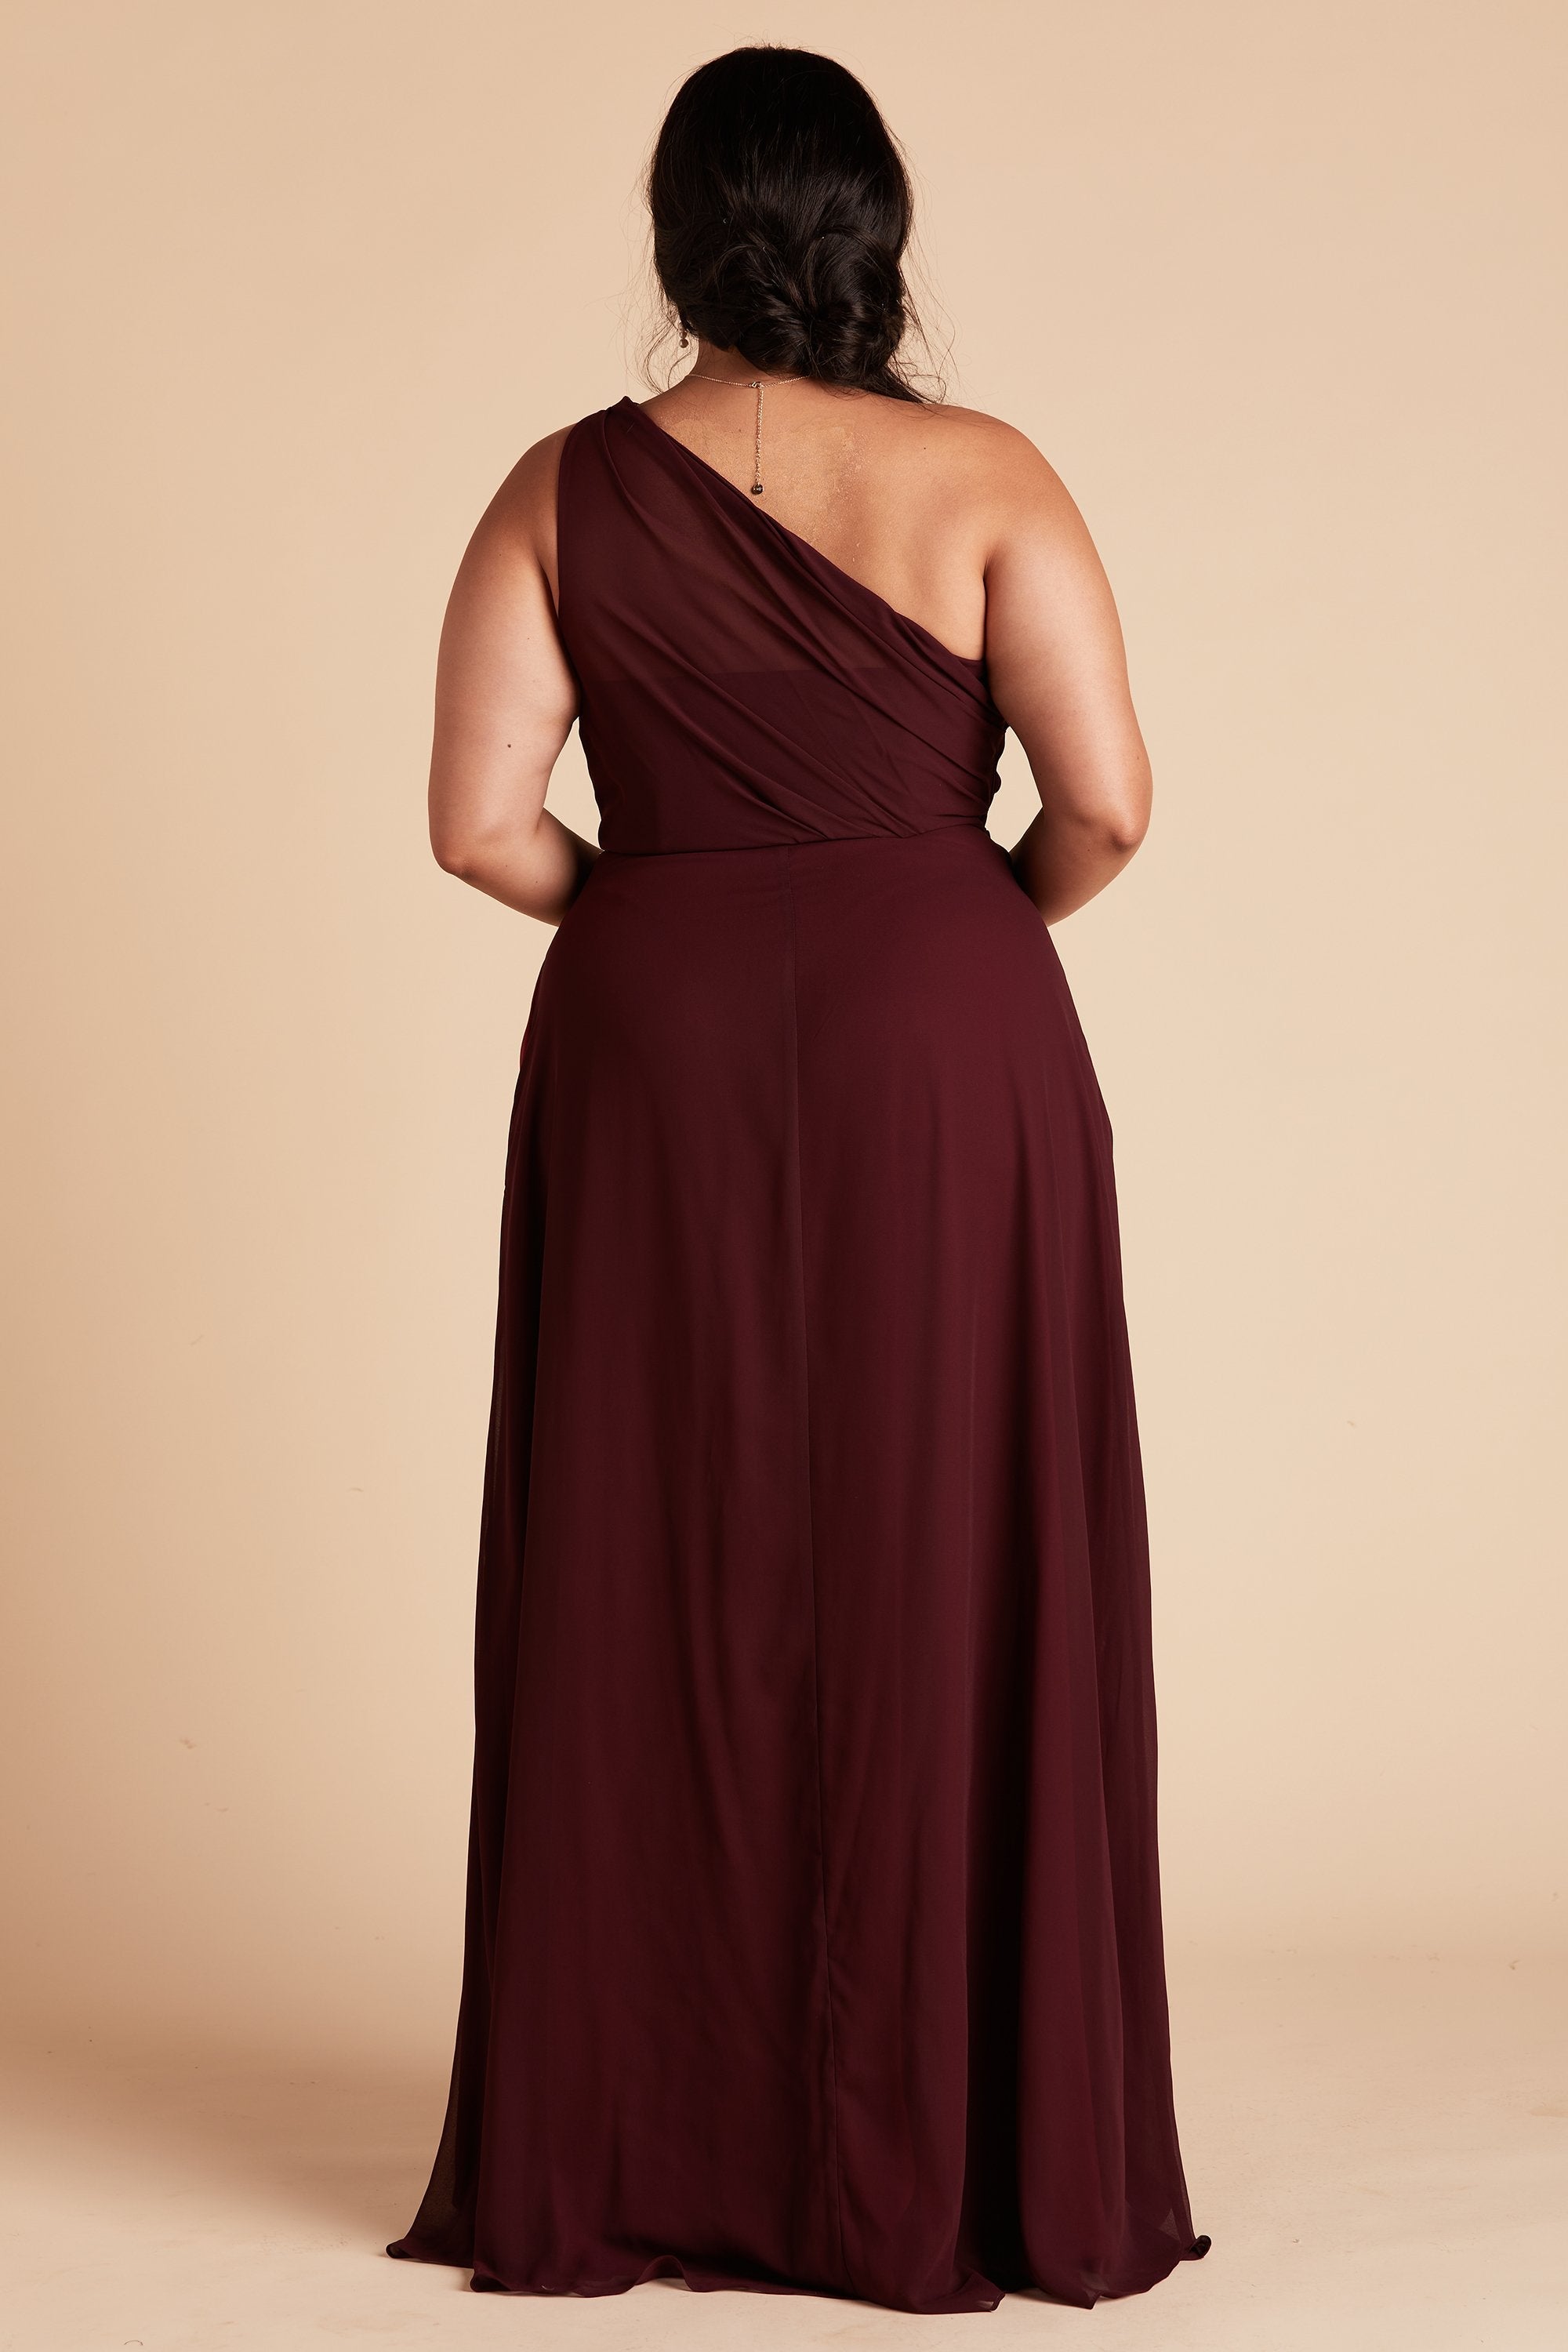 Back view of the Kira Dress Curve in cabernet chiffon shows a full-figured model with a medium skin tone. The back of the dress has sheer chiffon fabric which creates a pleated Grecian one-shoulder neckline and bodice. 